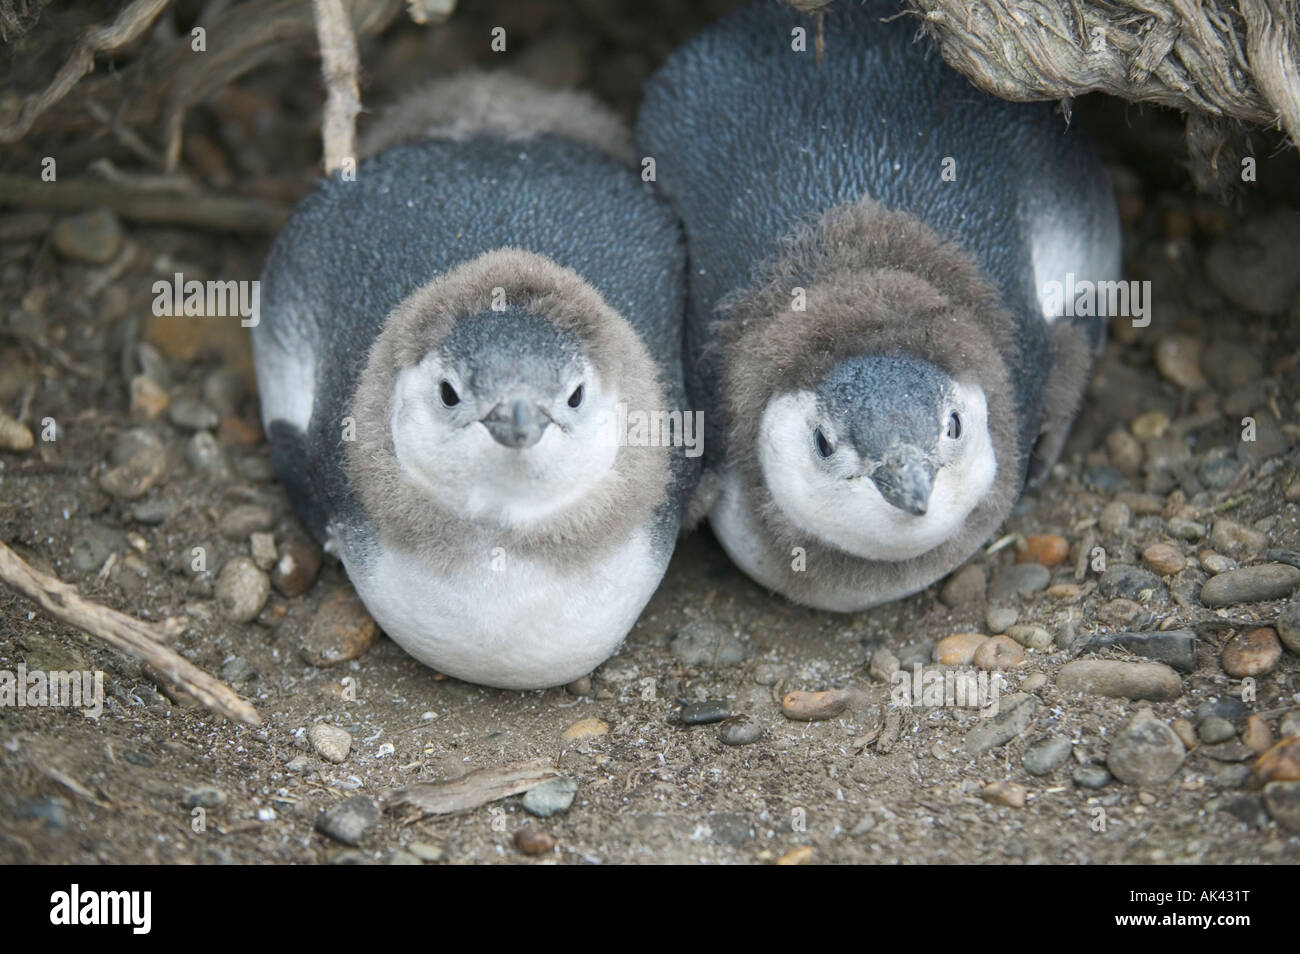 Young Magellanic penguin chicks in their nest, Punta Tombo, near Trelew, Patagonia, Argentina. Stock Photo